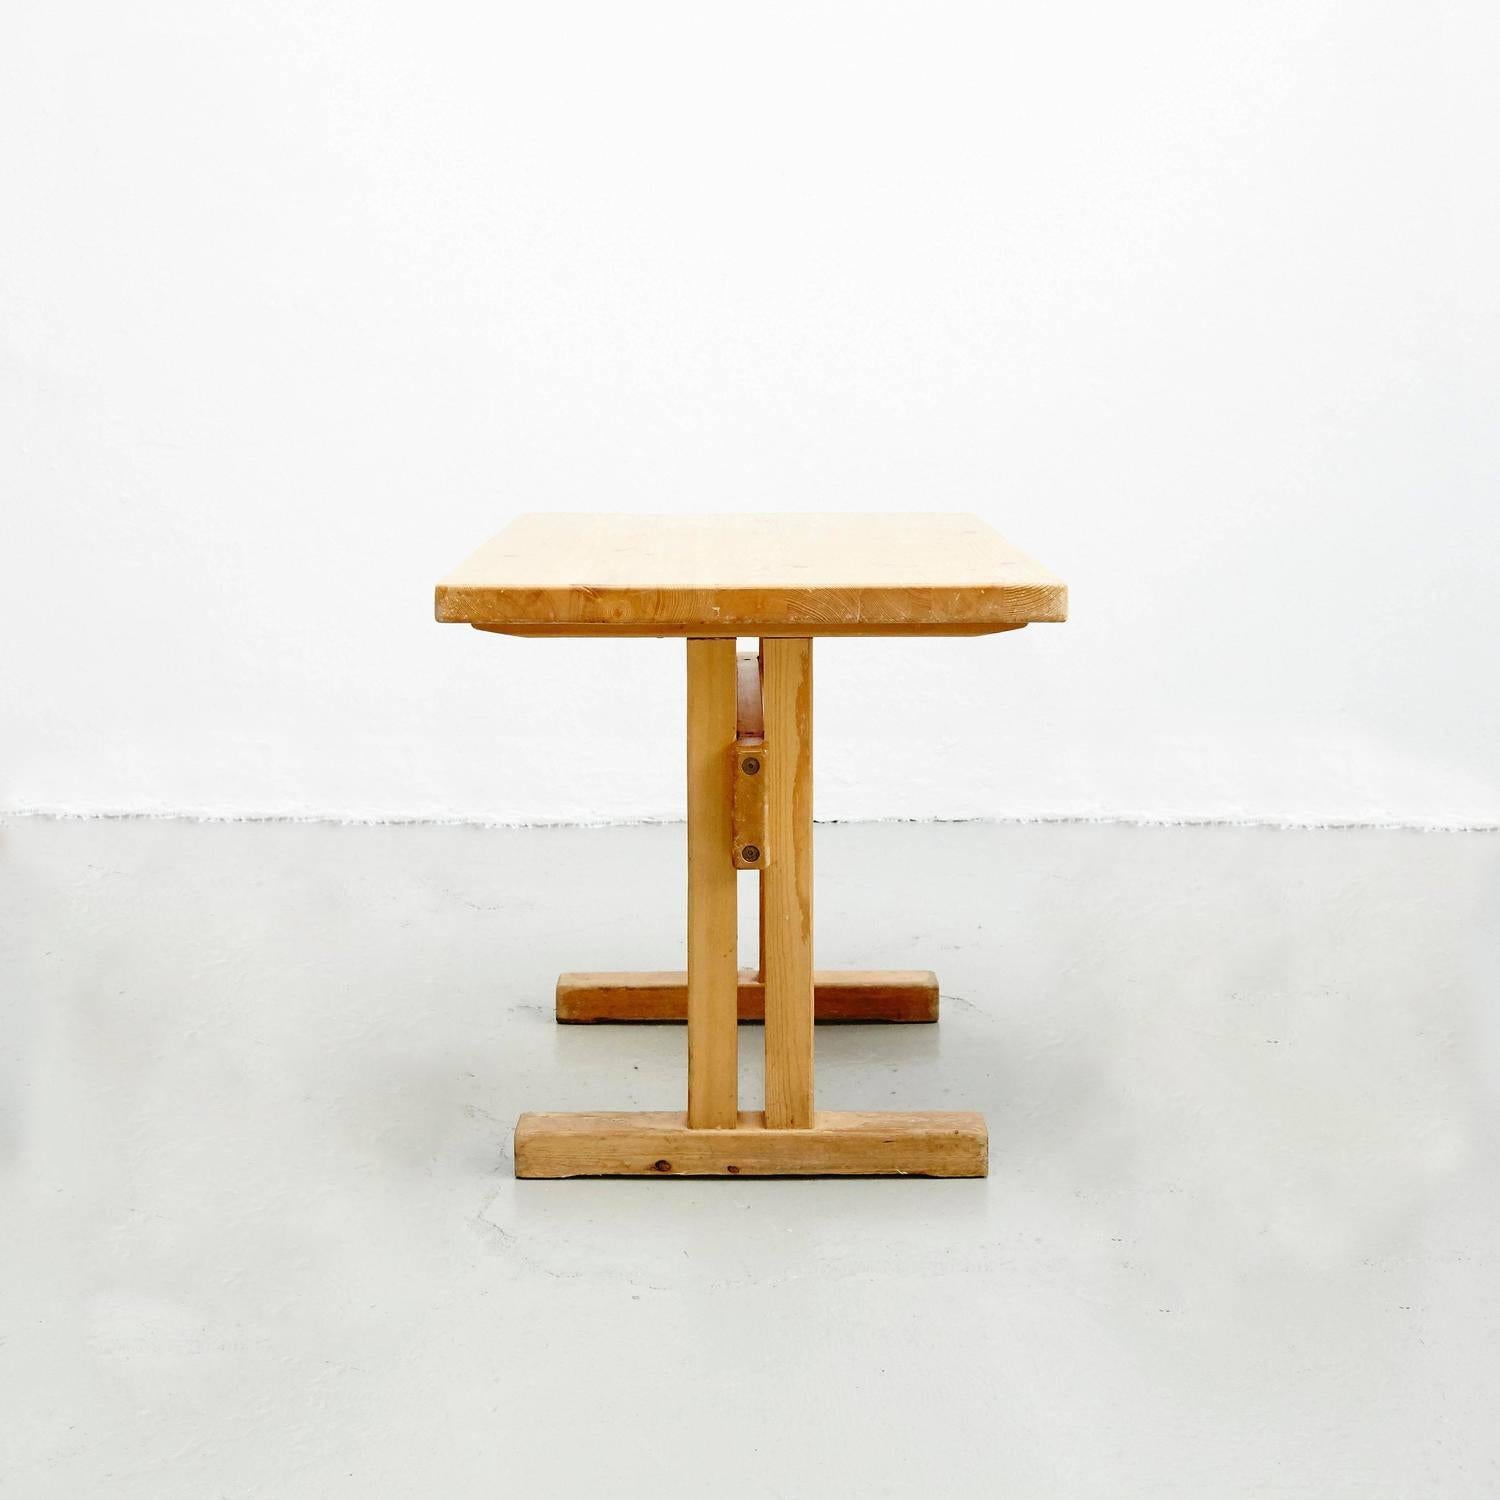 Table designed by Charlotte Perriand for Les Arcs ski Resort, circa 1960, manufactured in France.

Pinewood.

In original condition, with minor wear consistent with age and use, preserving a beautiful patina.

Charlotte Perriand (1903-1999)